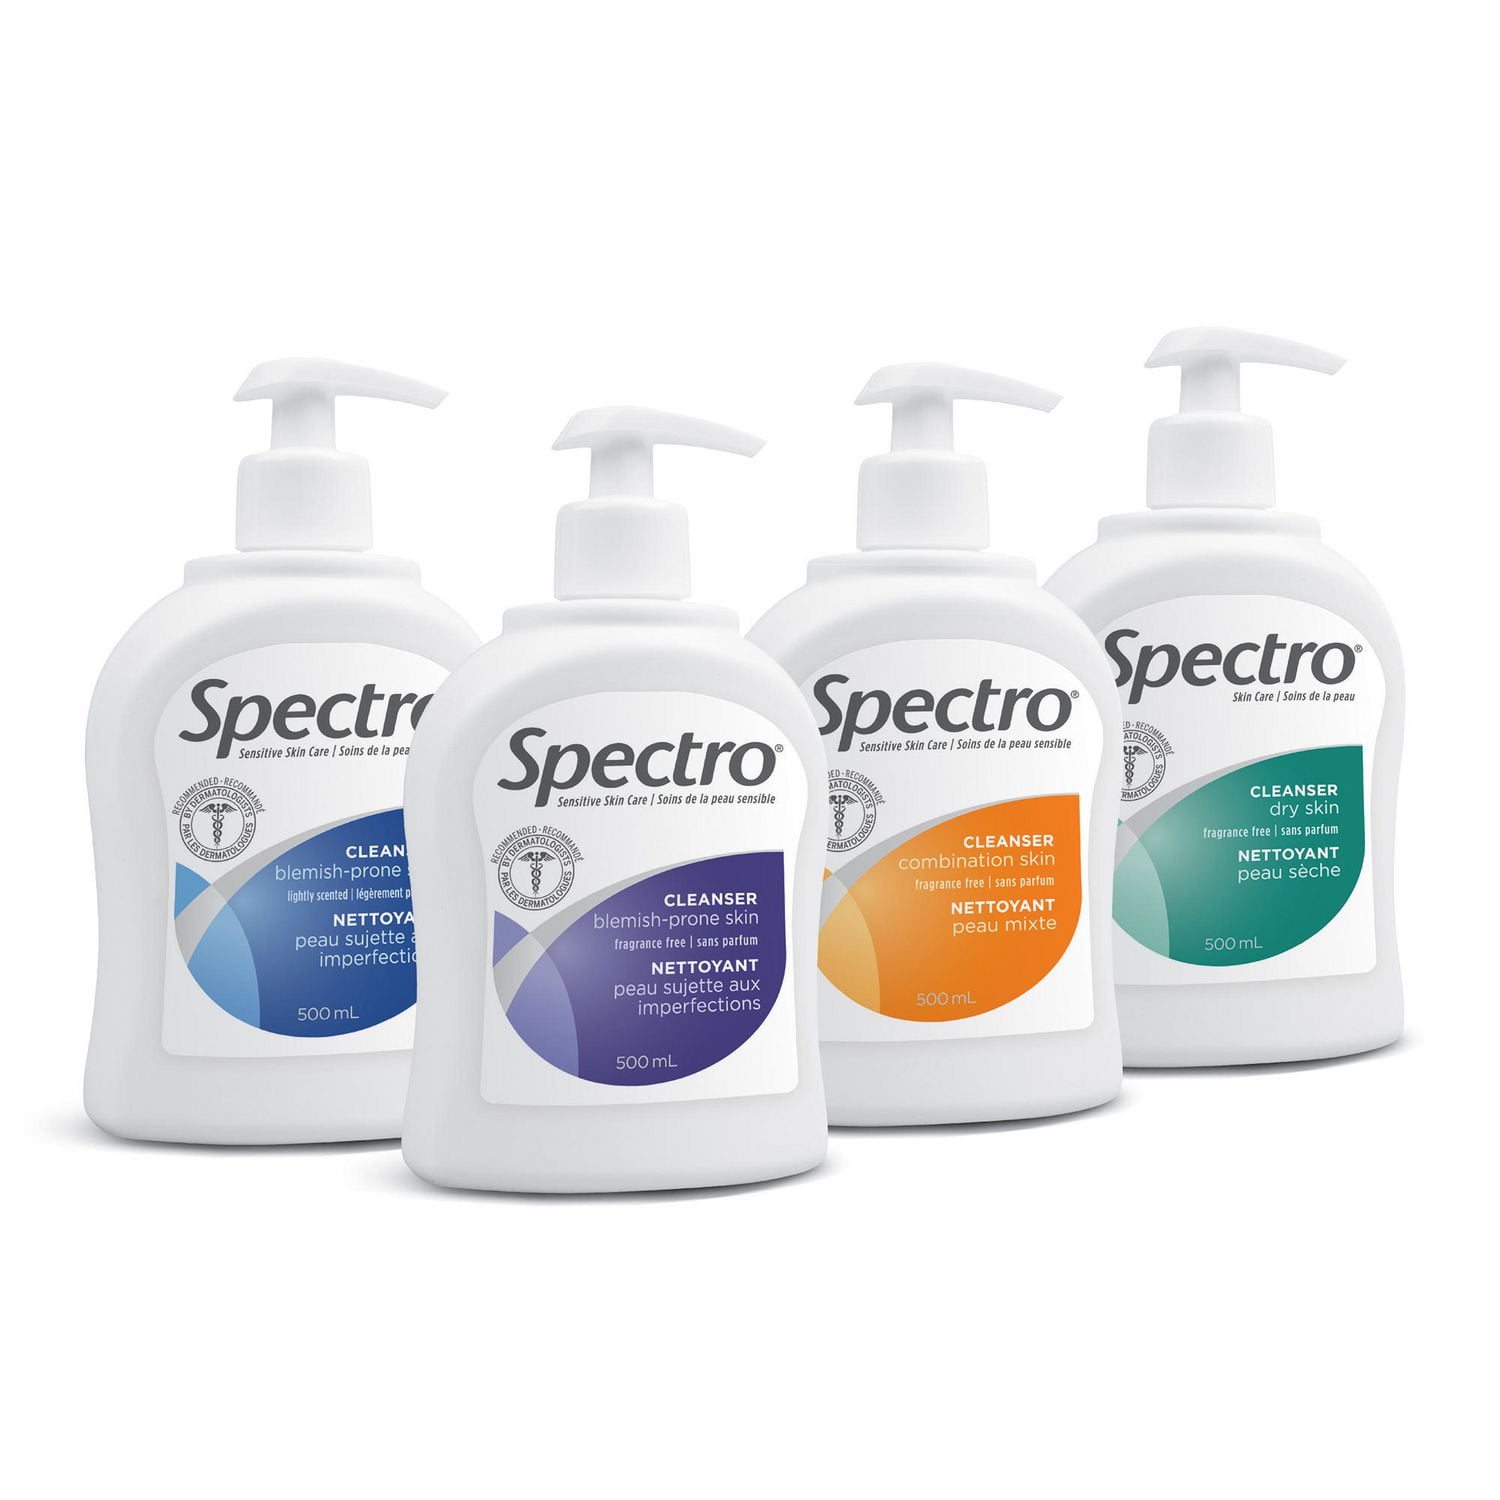 Spectro Facial Cleanser for Blemish-Prone Skin (200 mL)